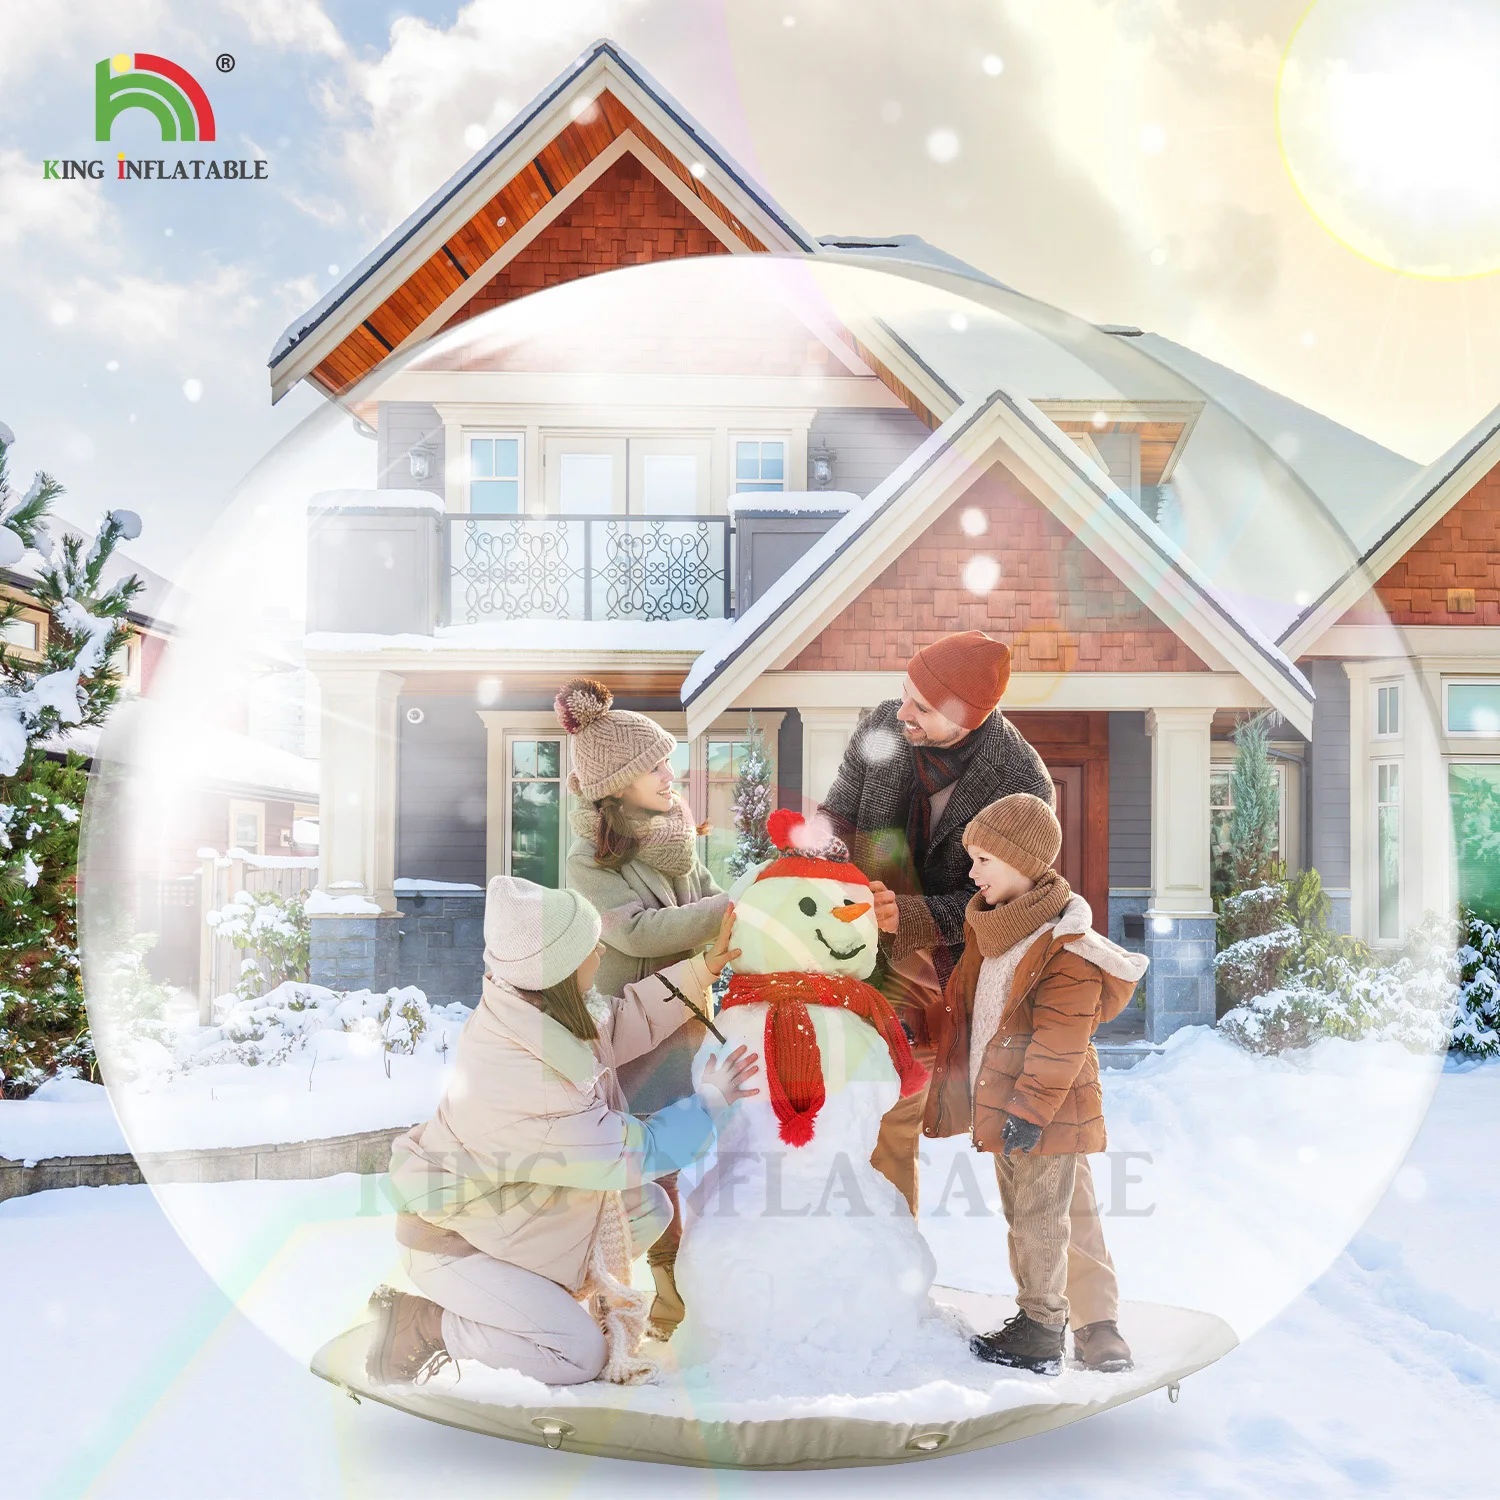 10ft/3m PVC Transparent Bubble Tent Giant Inflatable Snowball Christmas Snow Globe Dome Xmas Outdoor Decoration With Blower 2018 xmas advertising transparent inflatable dome snow bubble tent photo booth inflatable christmas snow globe for advertising